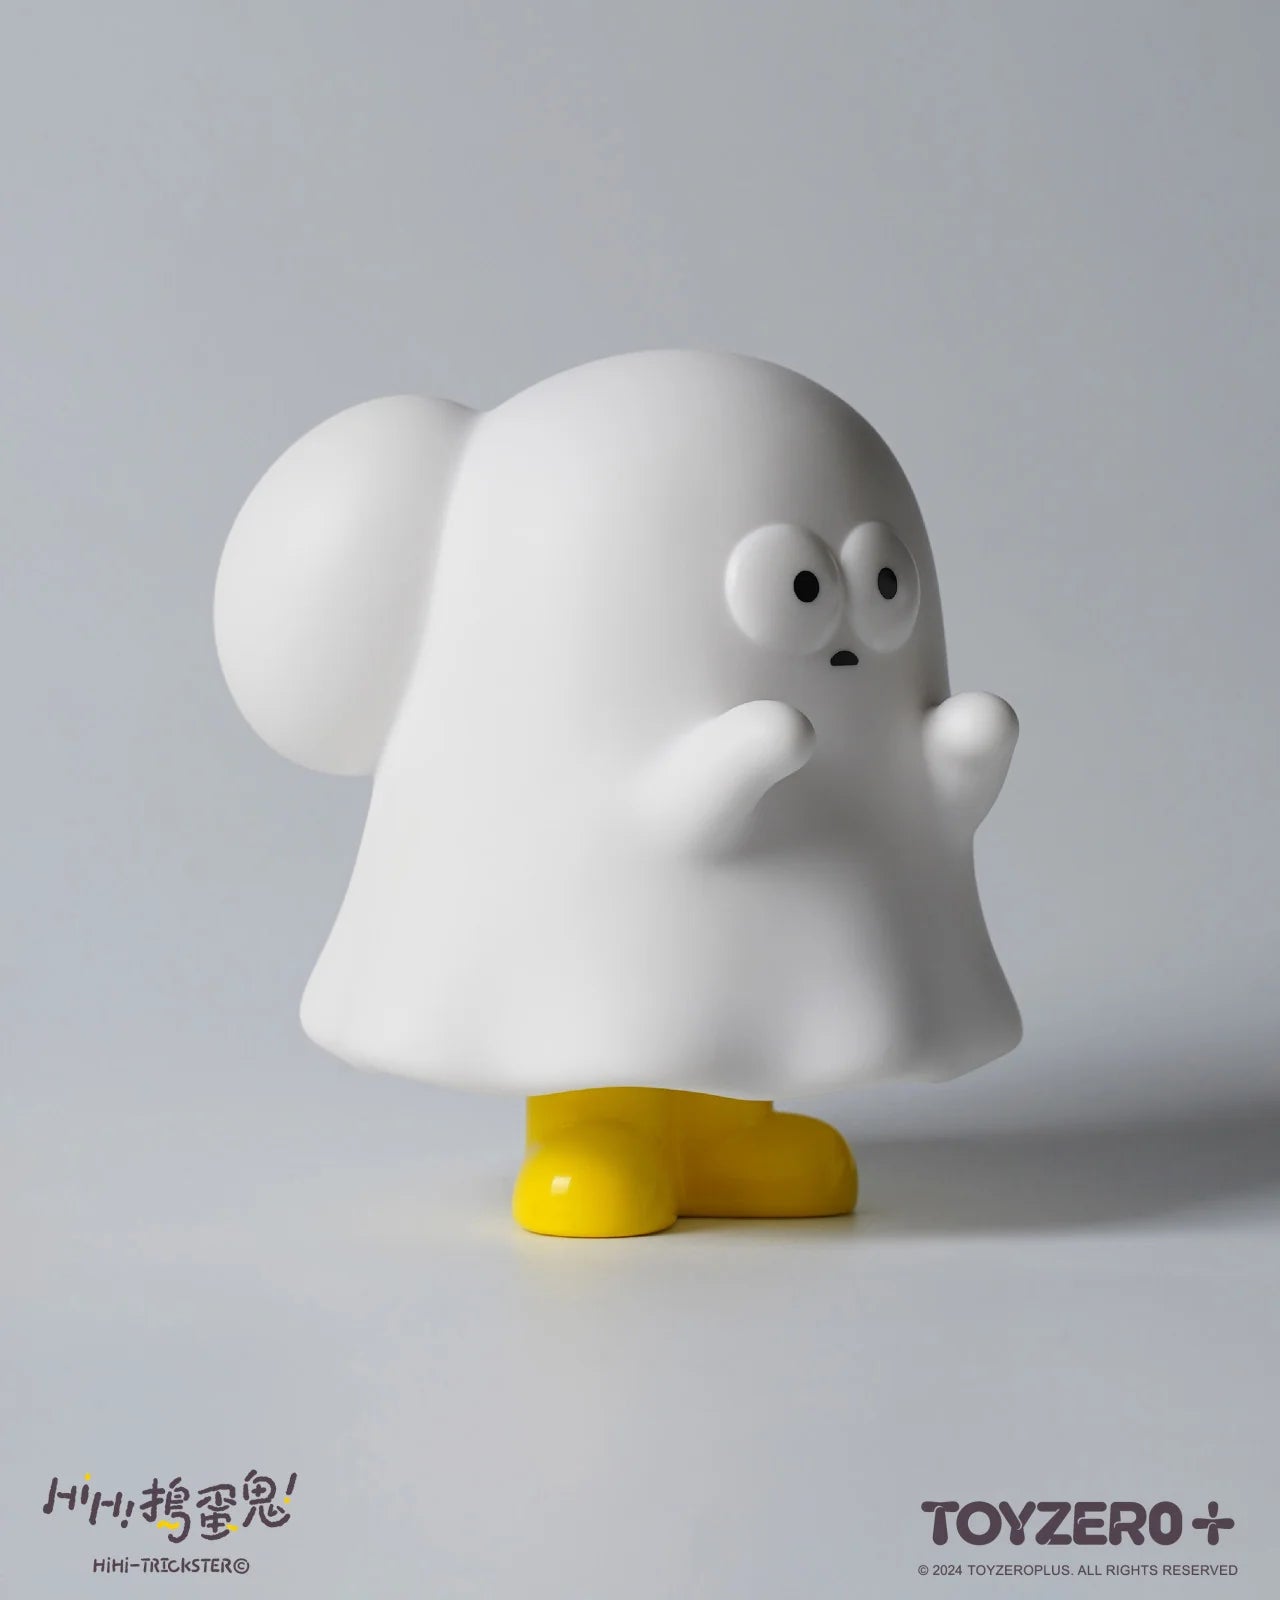 A white vinyl toy with a ghost-like cloak and yellow boots, titled HiHi Trickster - Original ver., measuring 10cm tall.